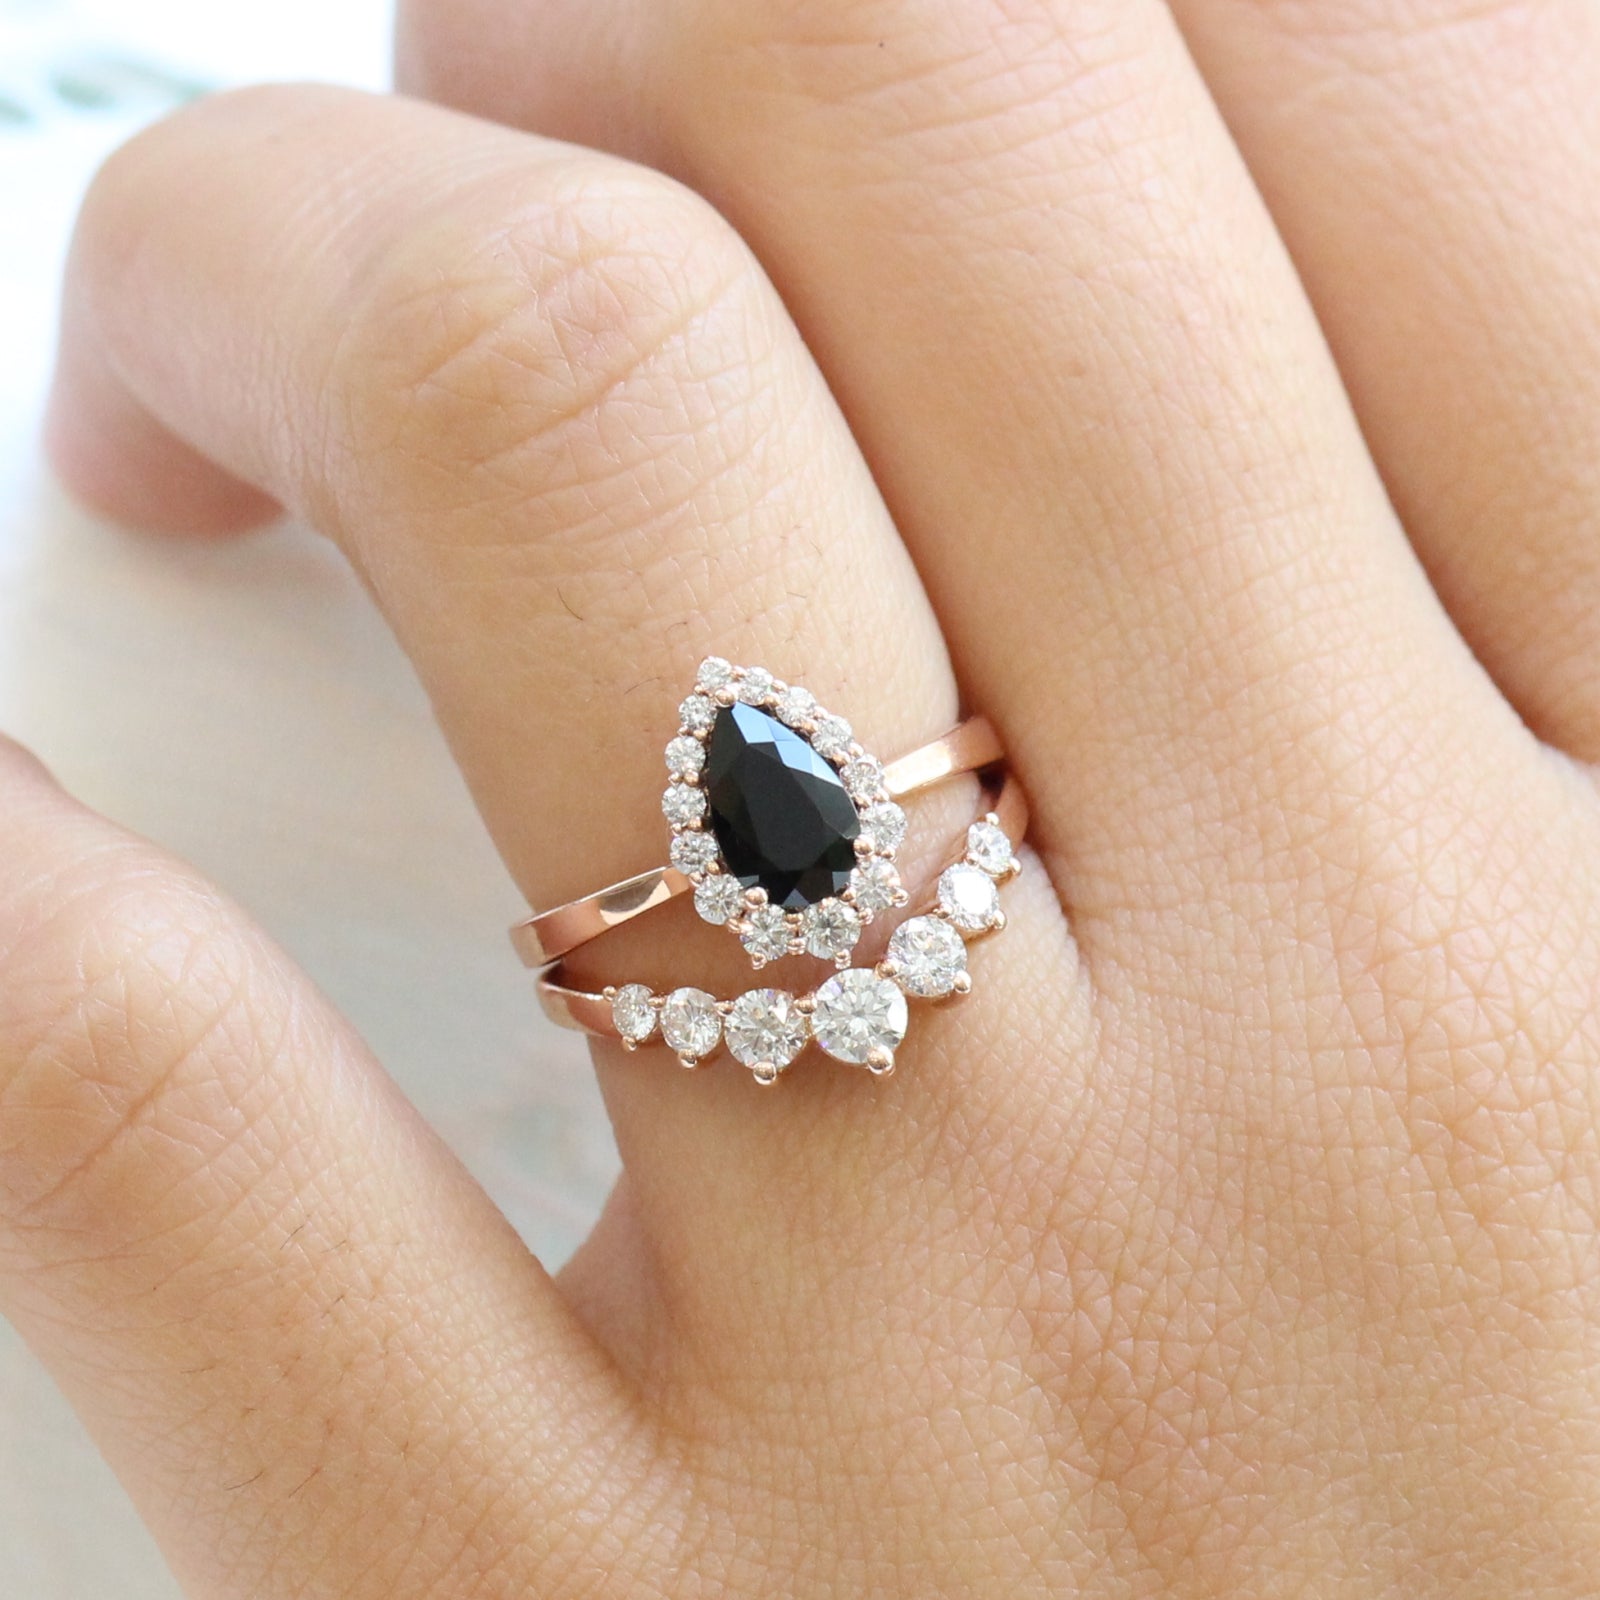 Black spinel diamond pear engagement ring rose gold and curved large diamond wedding band by la more design jewelry